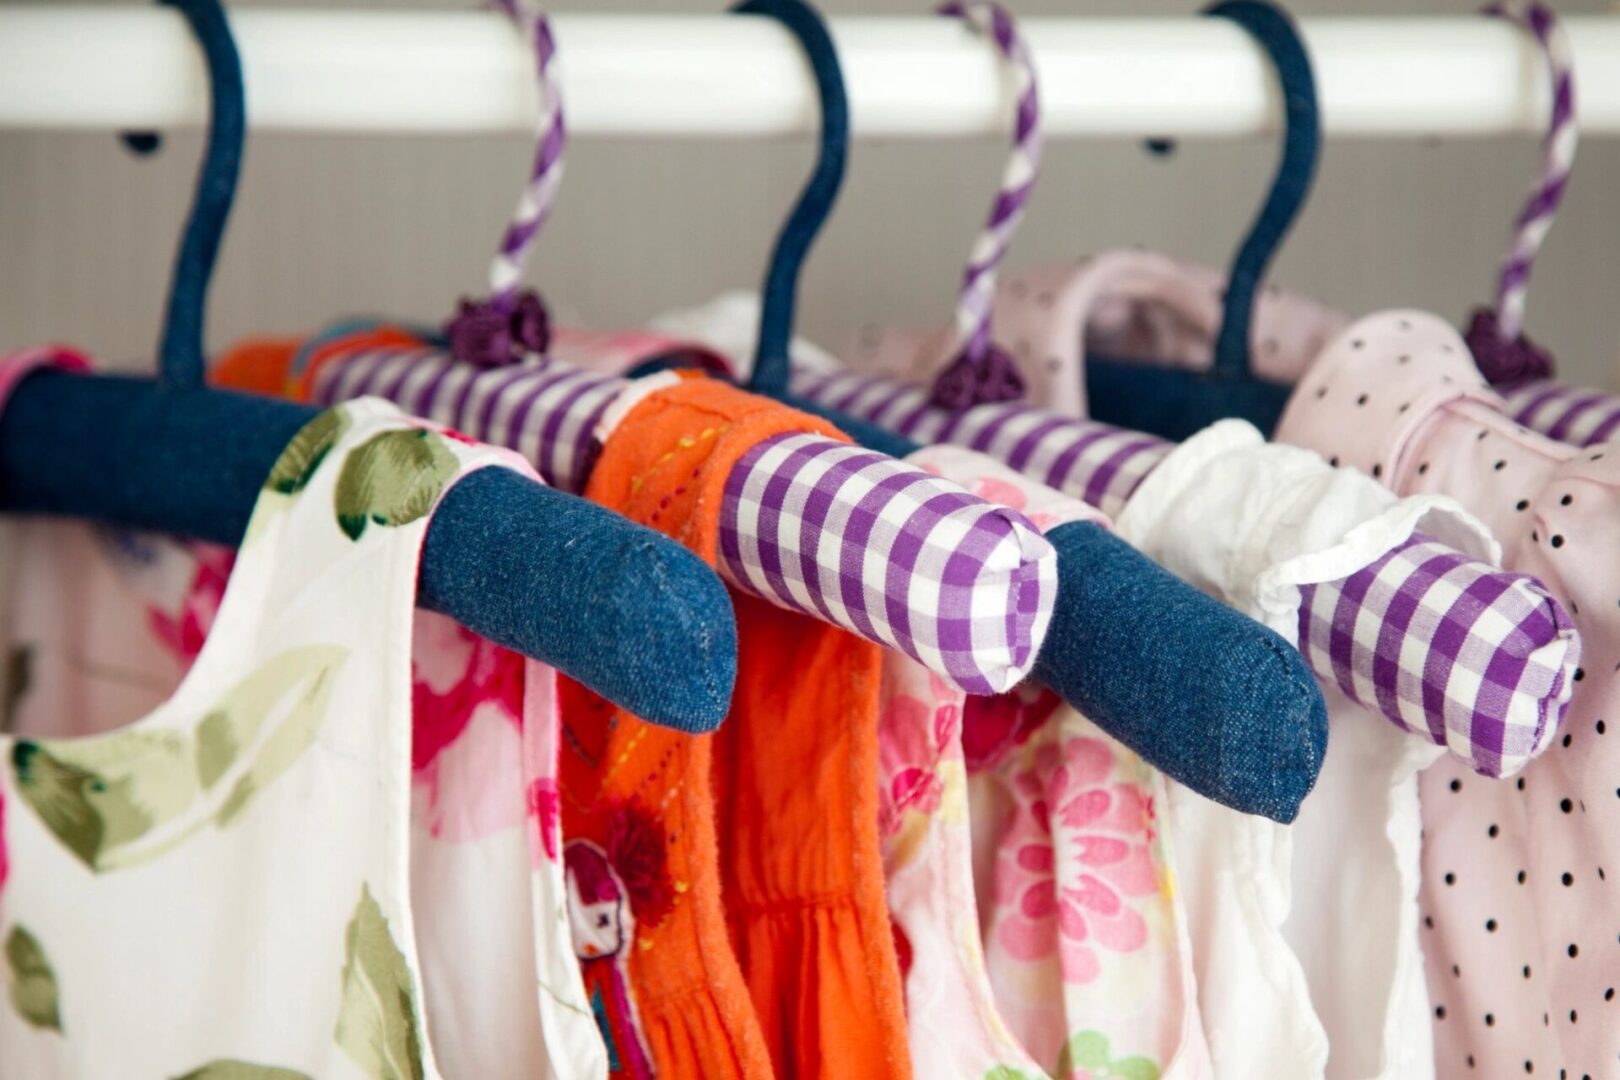 A close up of clothes hanging on hangers